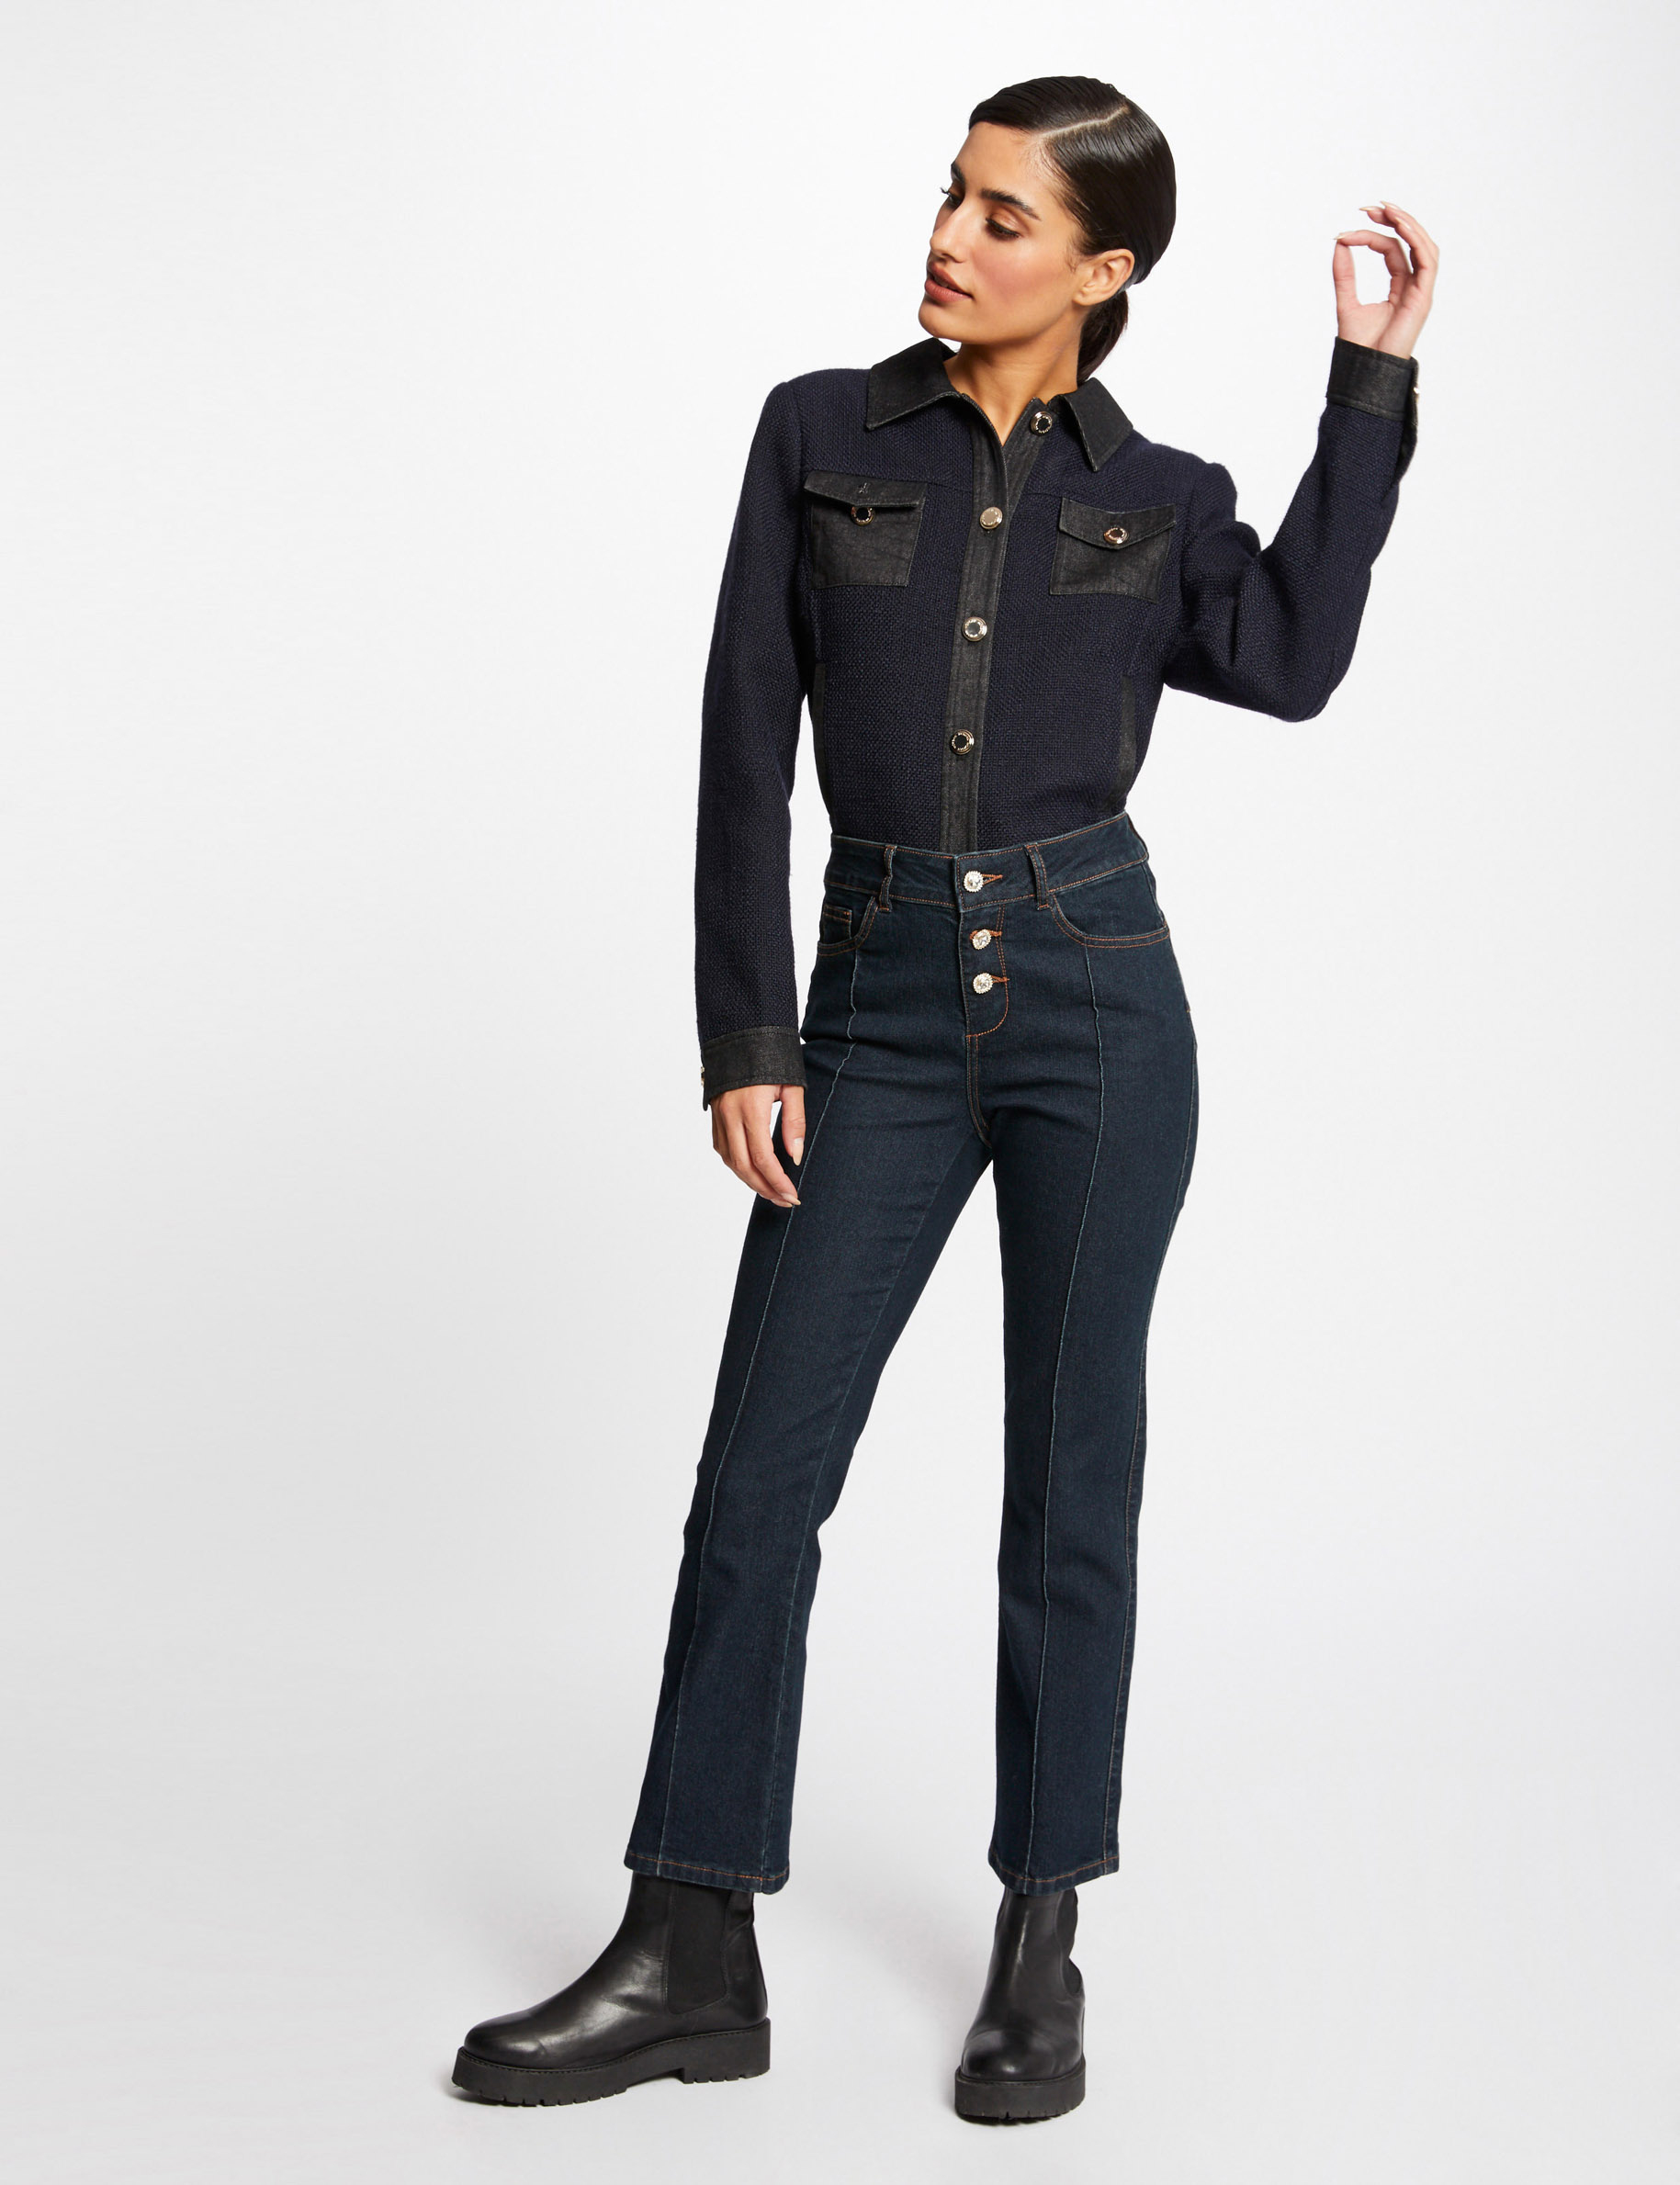 High-waisted straight jeans with buttons raw denim ladies'